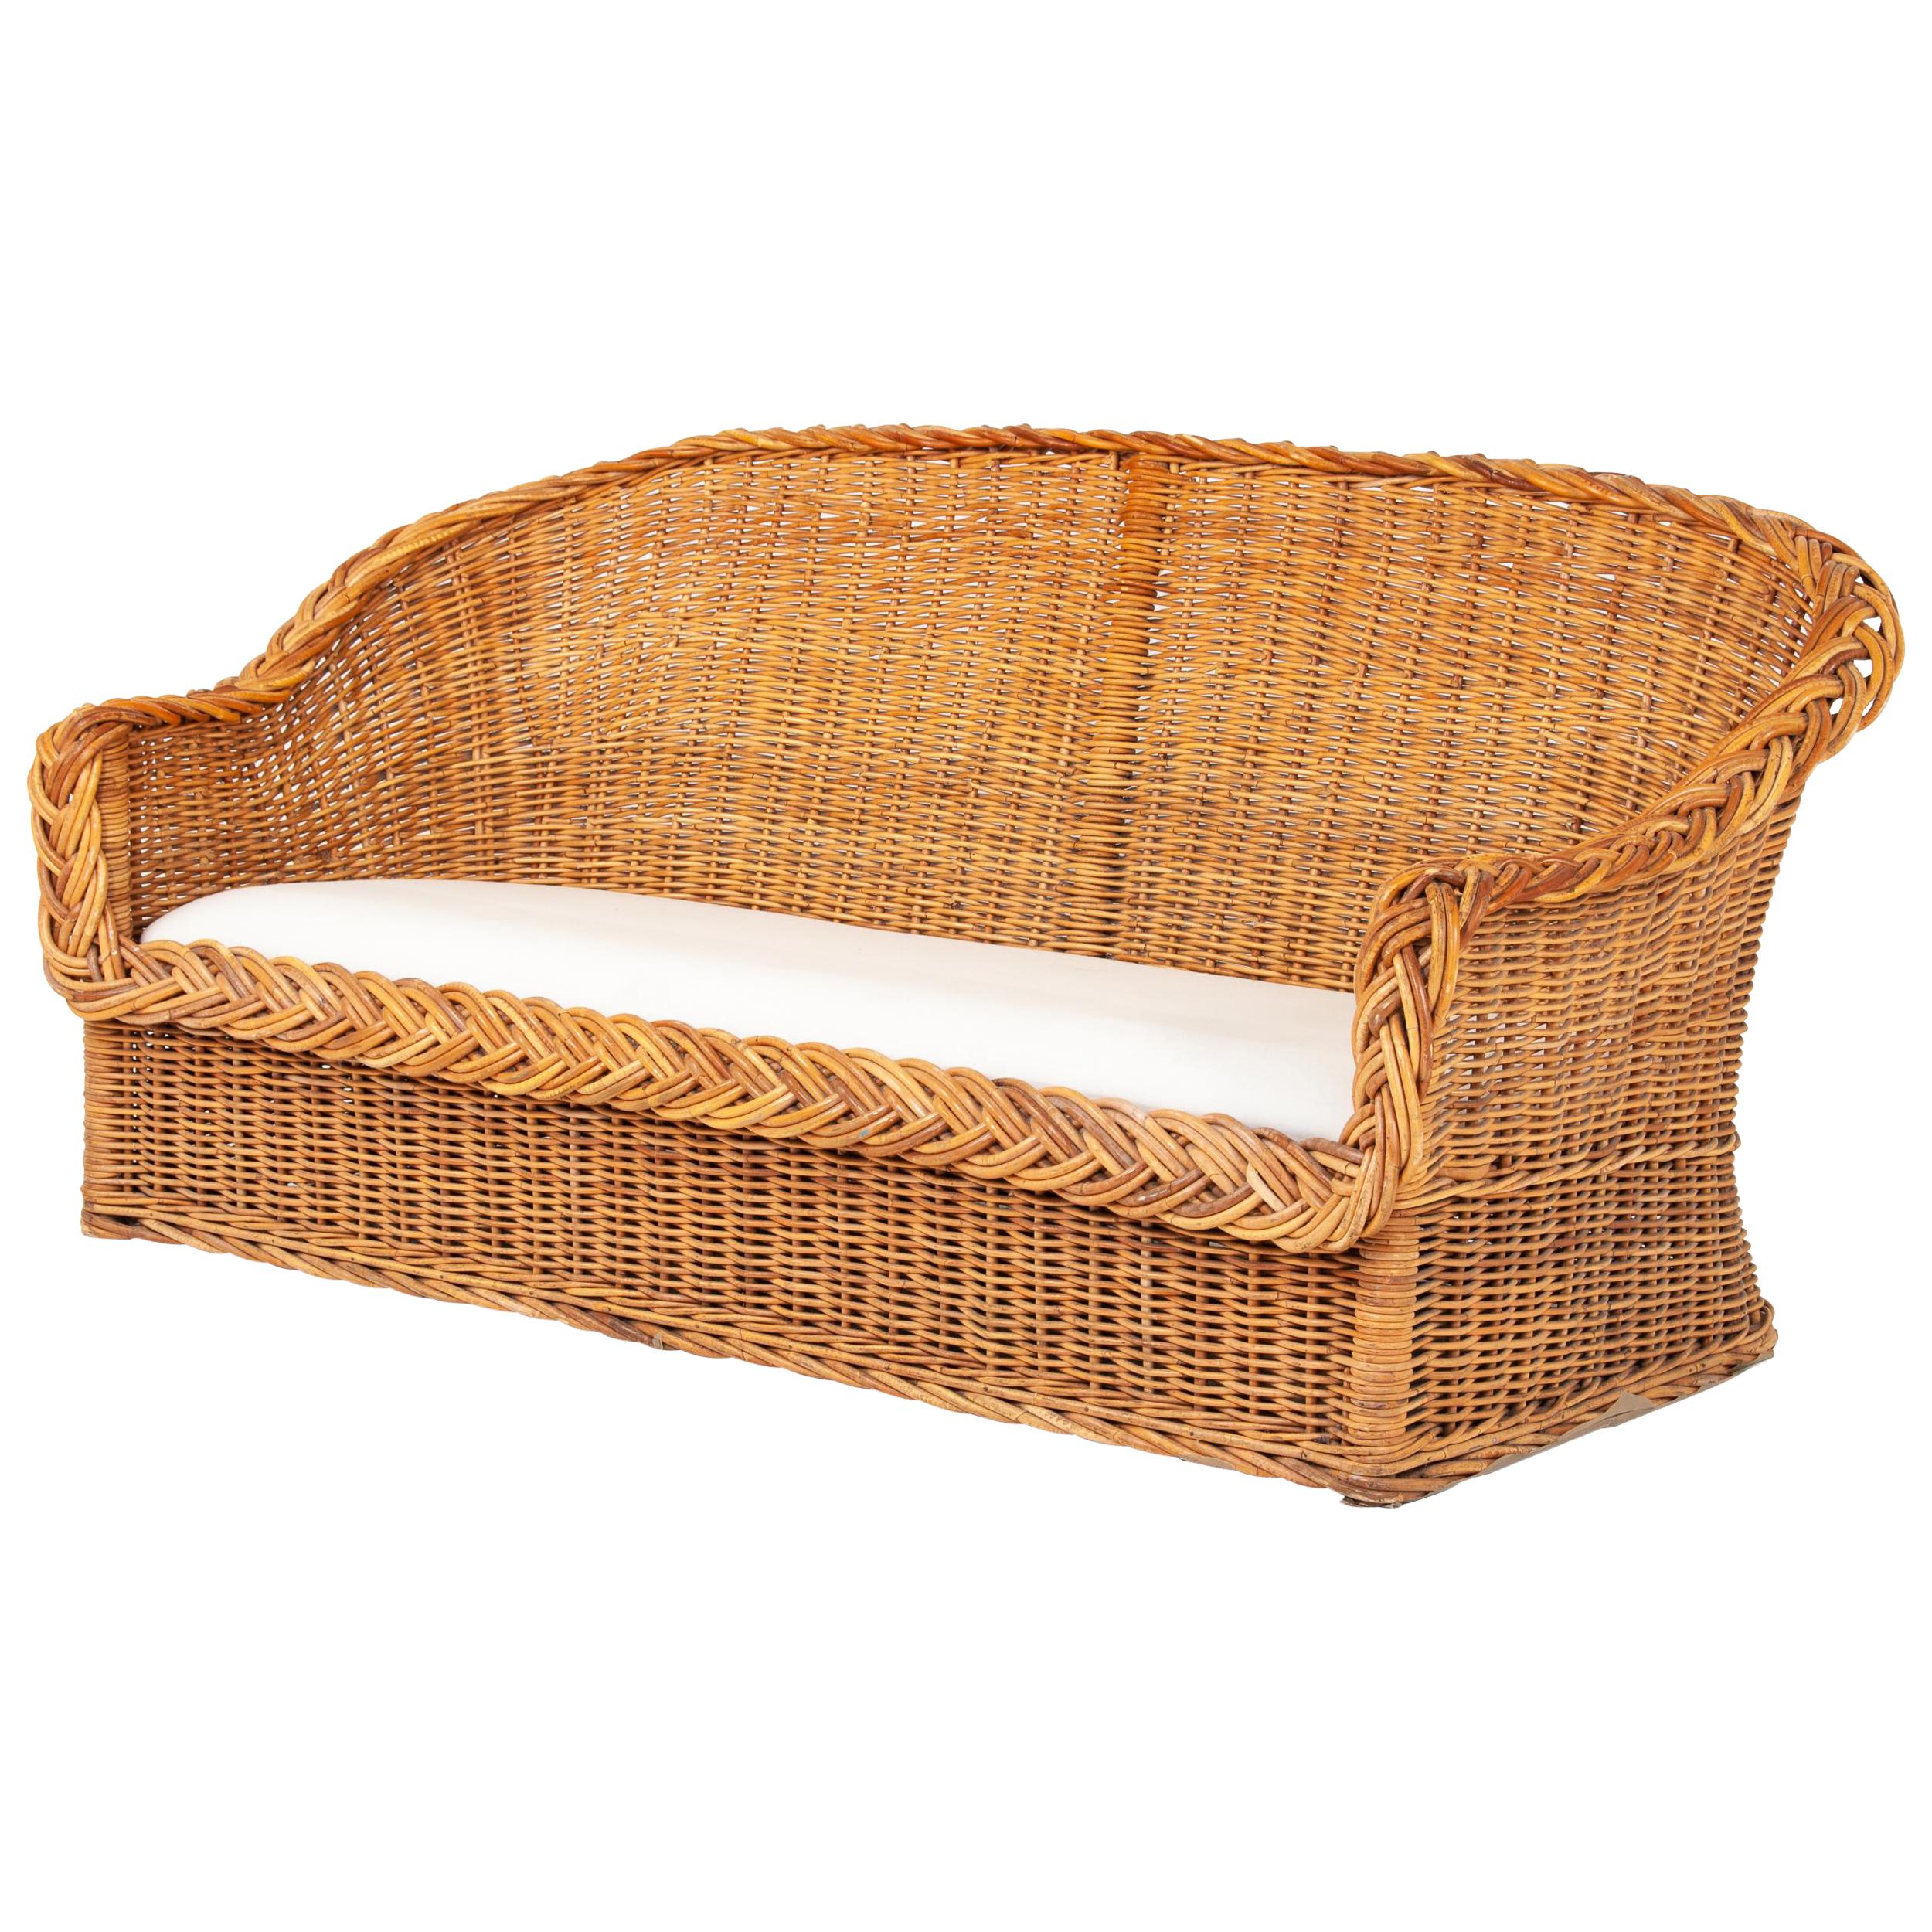 Rattan Bench Sofa with Linen Seat